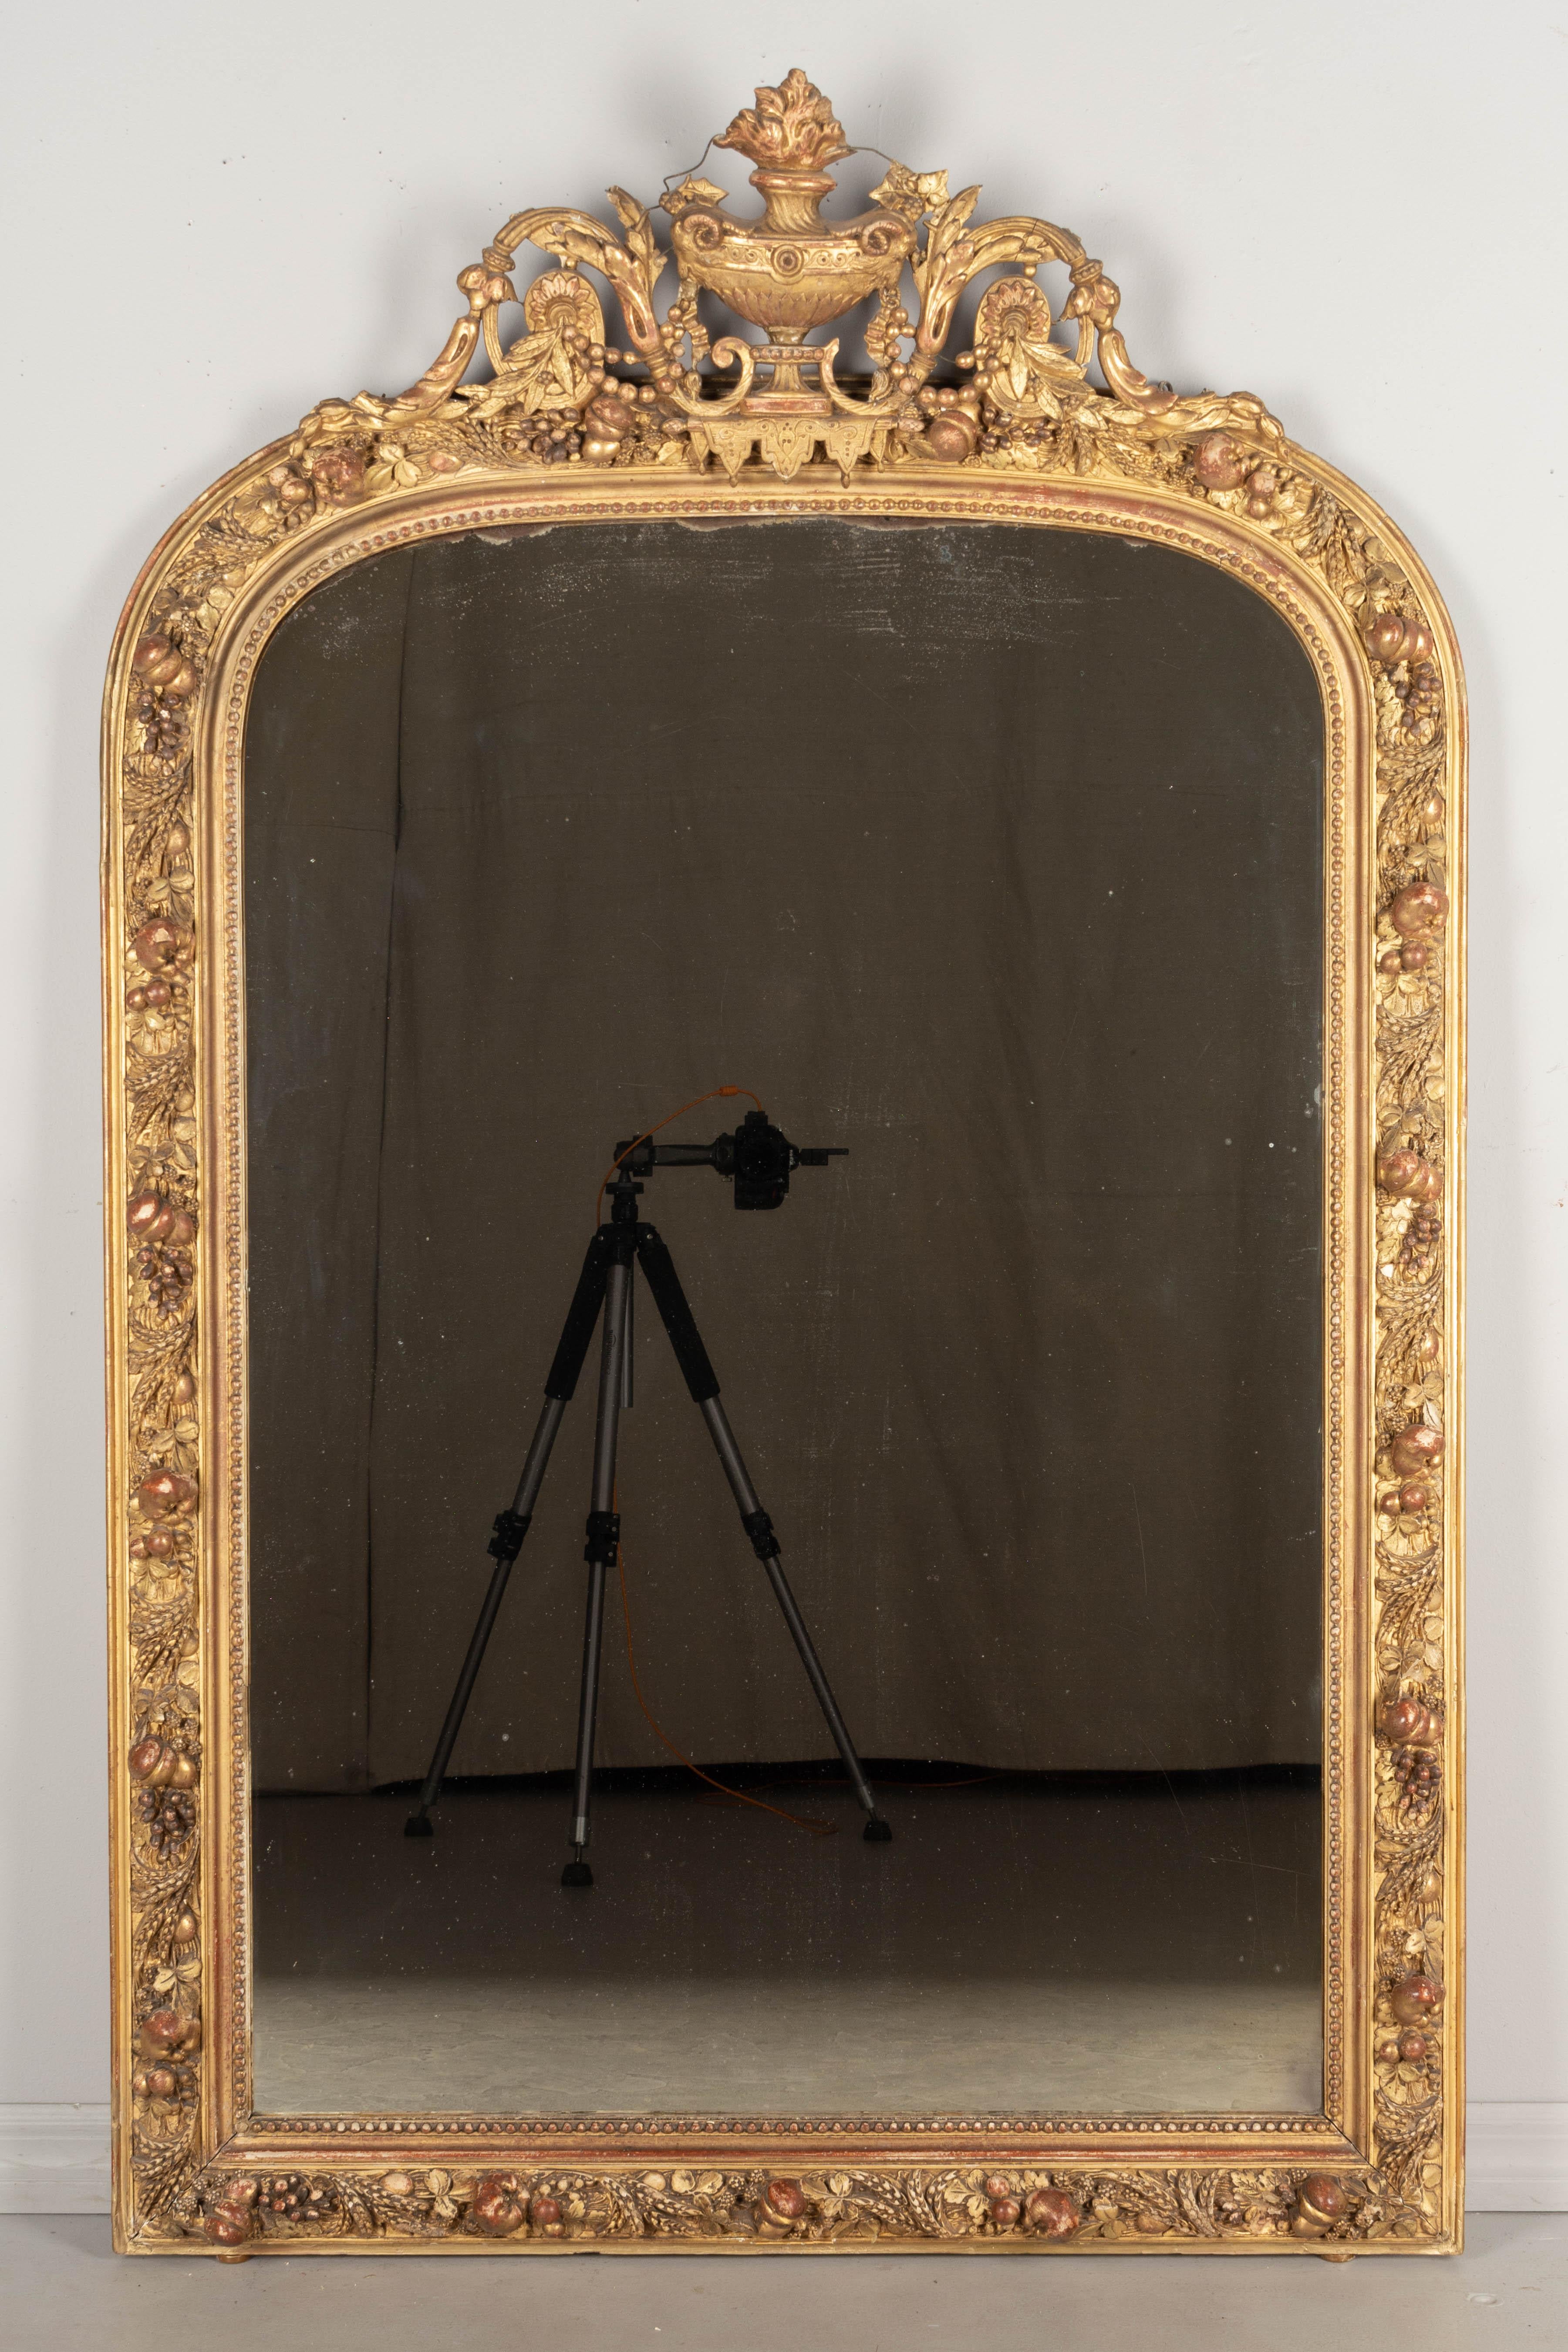 A 19th century Louis XV style gilded mirror with gesso fruits an an elaborate sculptural crest with urn, acanthus leaves, grape clusters and wheat. Nice three dimensional details. Warm gilt finish with some losses and touch-ups. Original mirror with